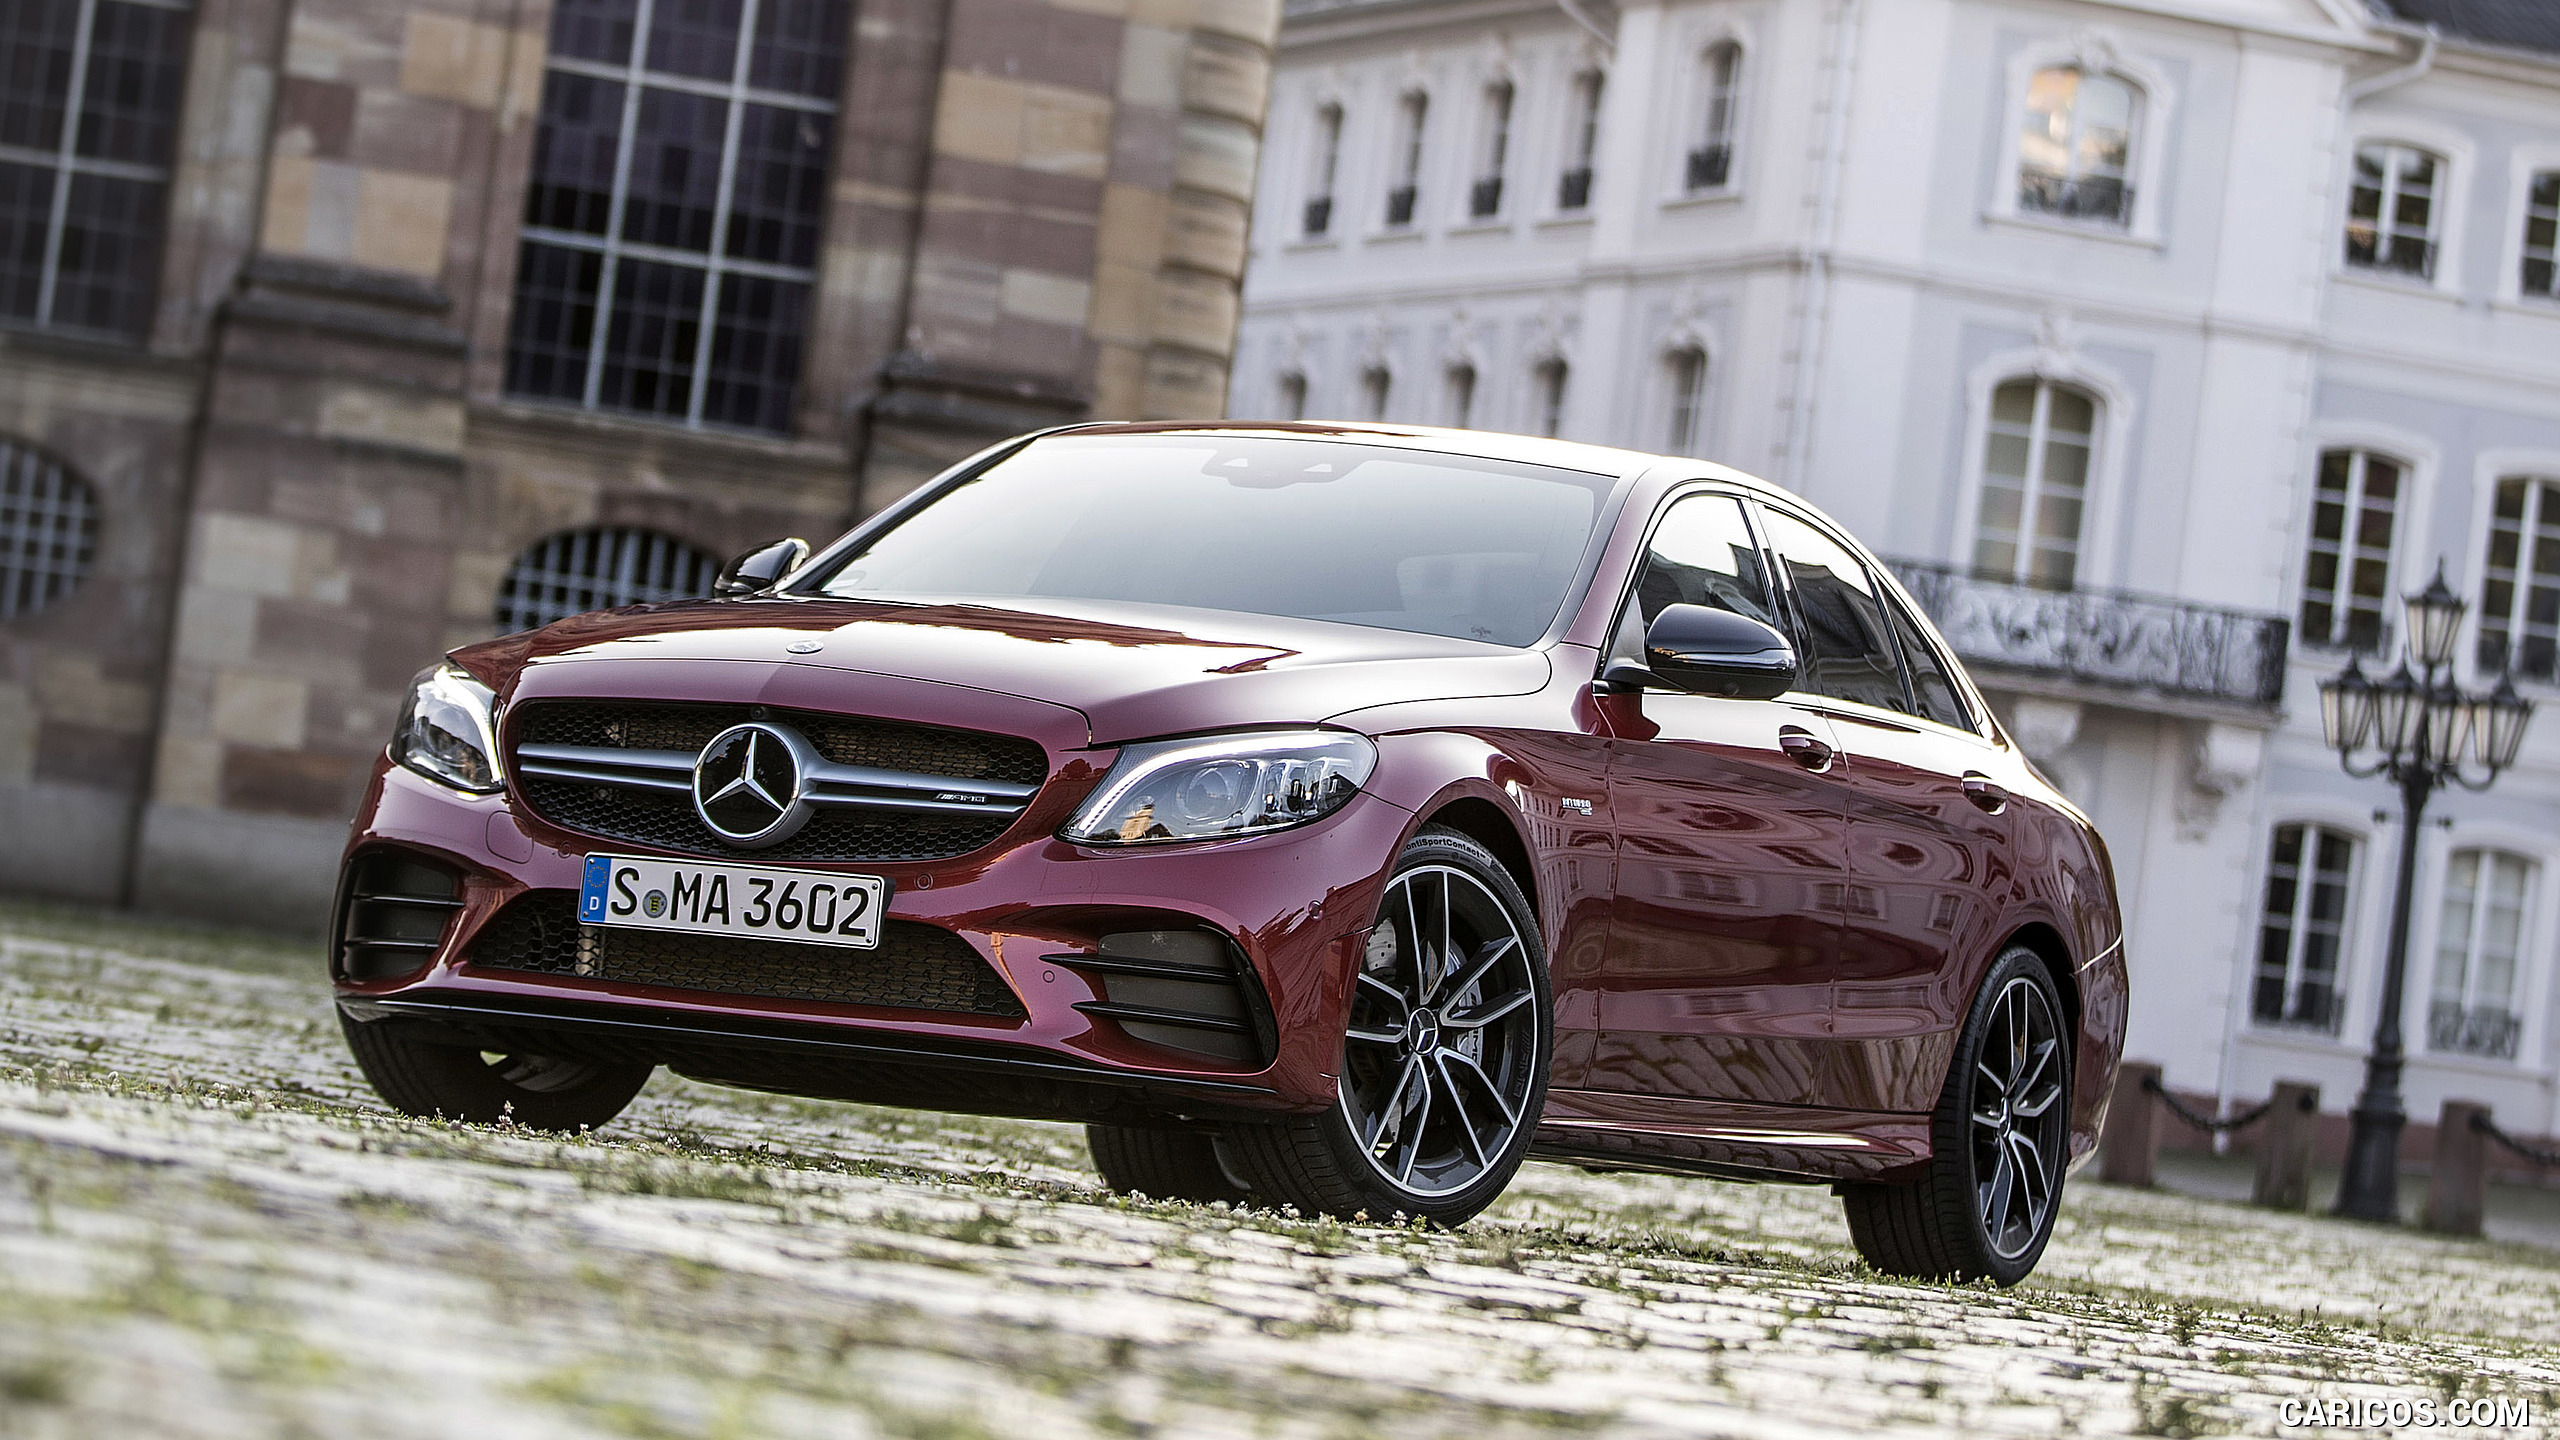 2019 Mercedes-AMG C43 4MATIC Sedan (Color: Hyacinth Red) - Front Three-Quarter, #56 of 192